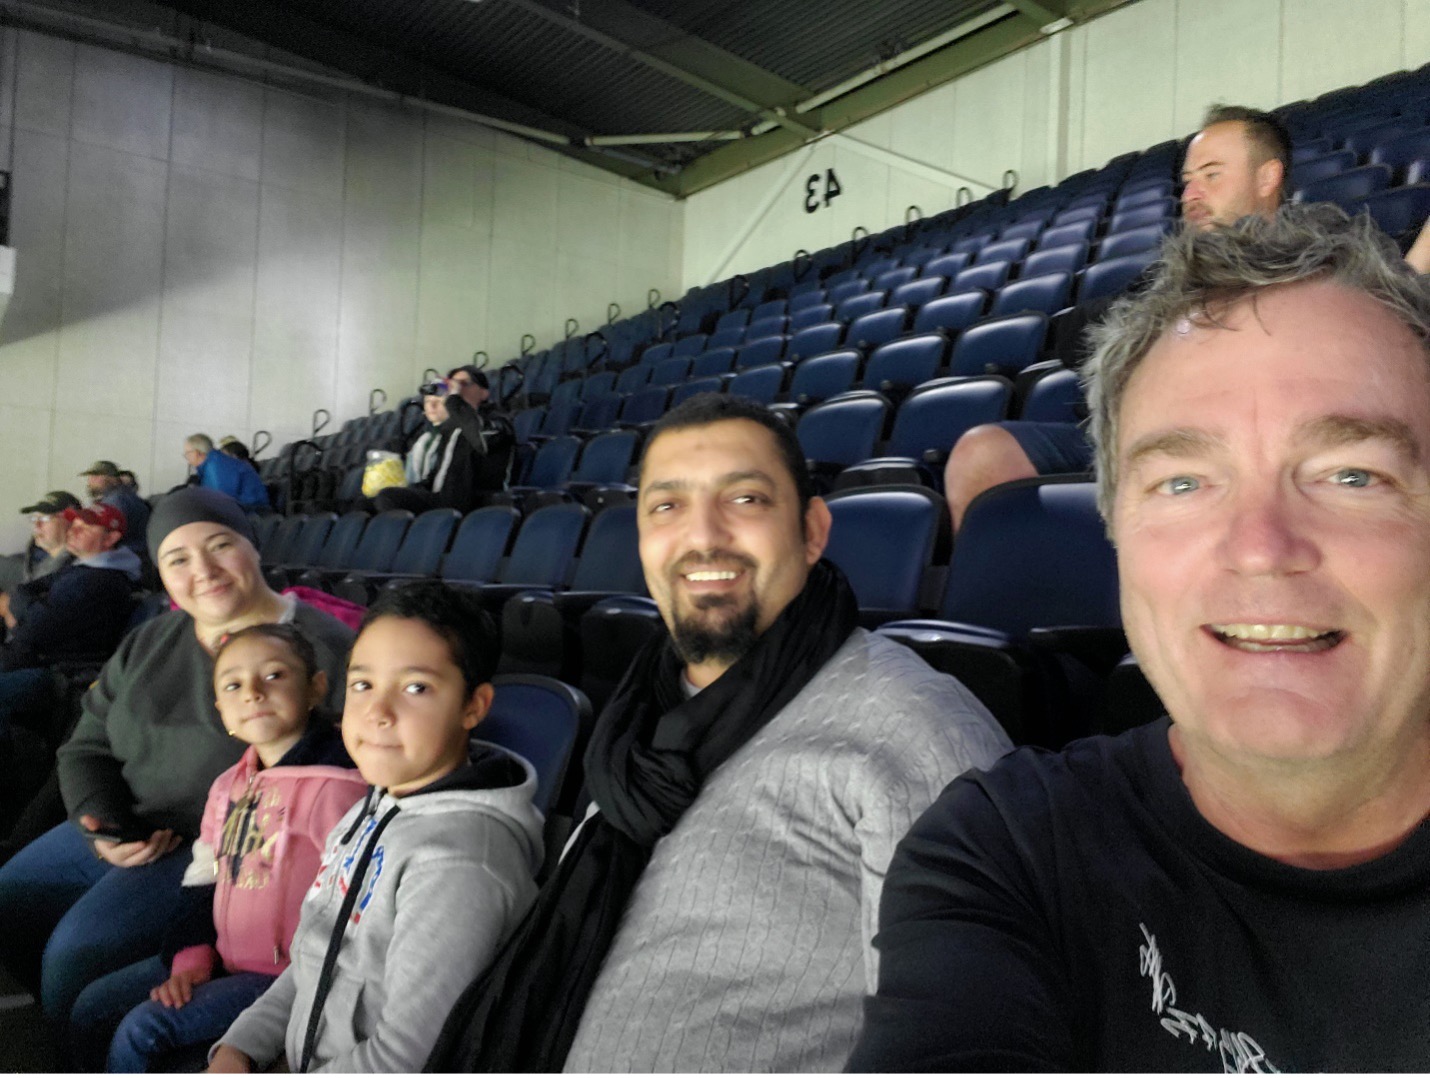 Toufik and his family during the Moosehead game with a volunteer